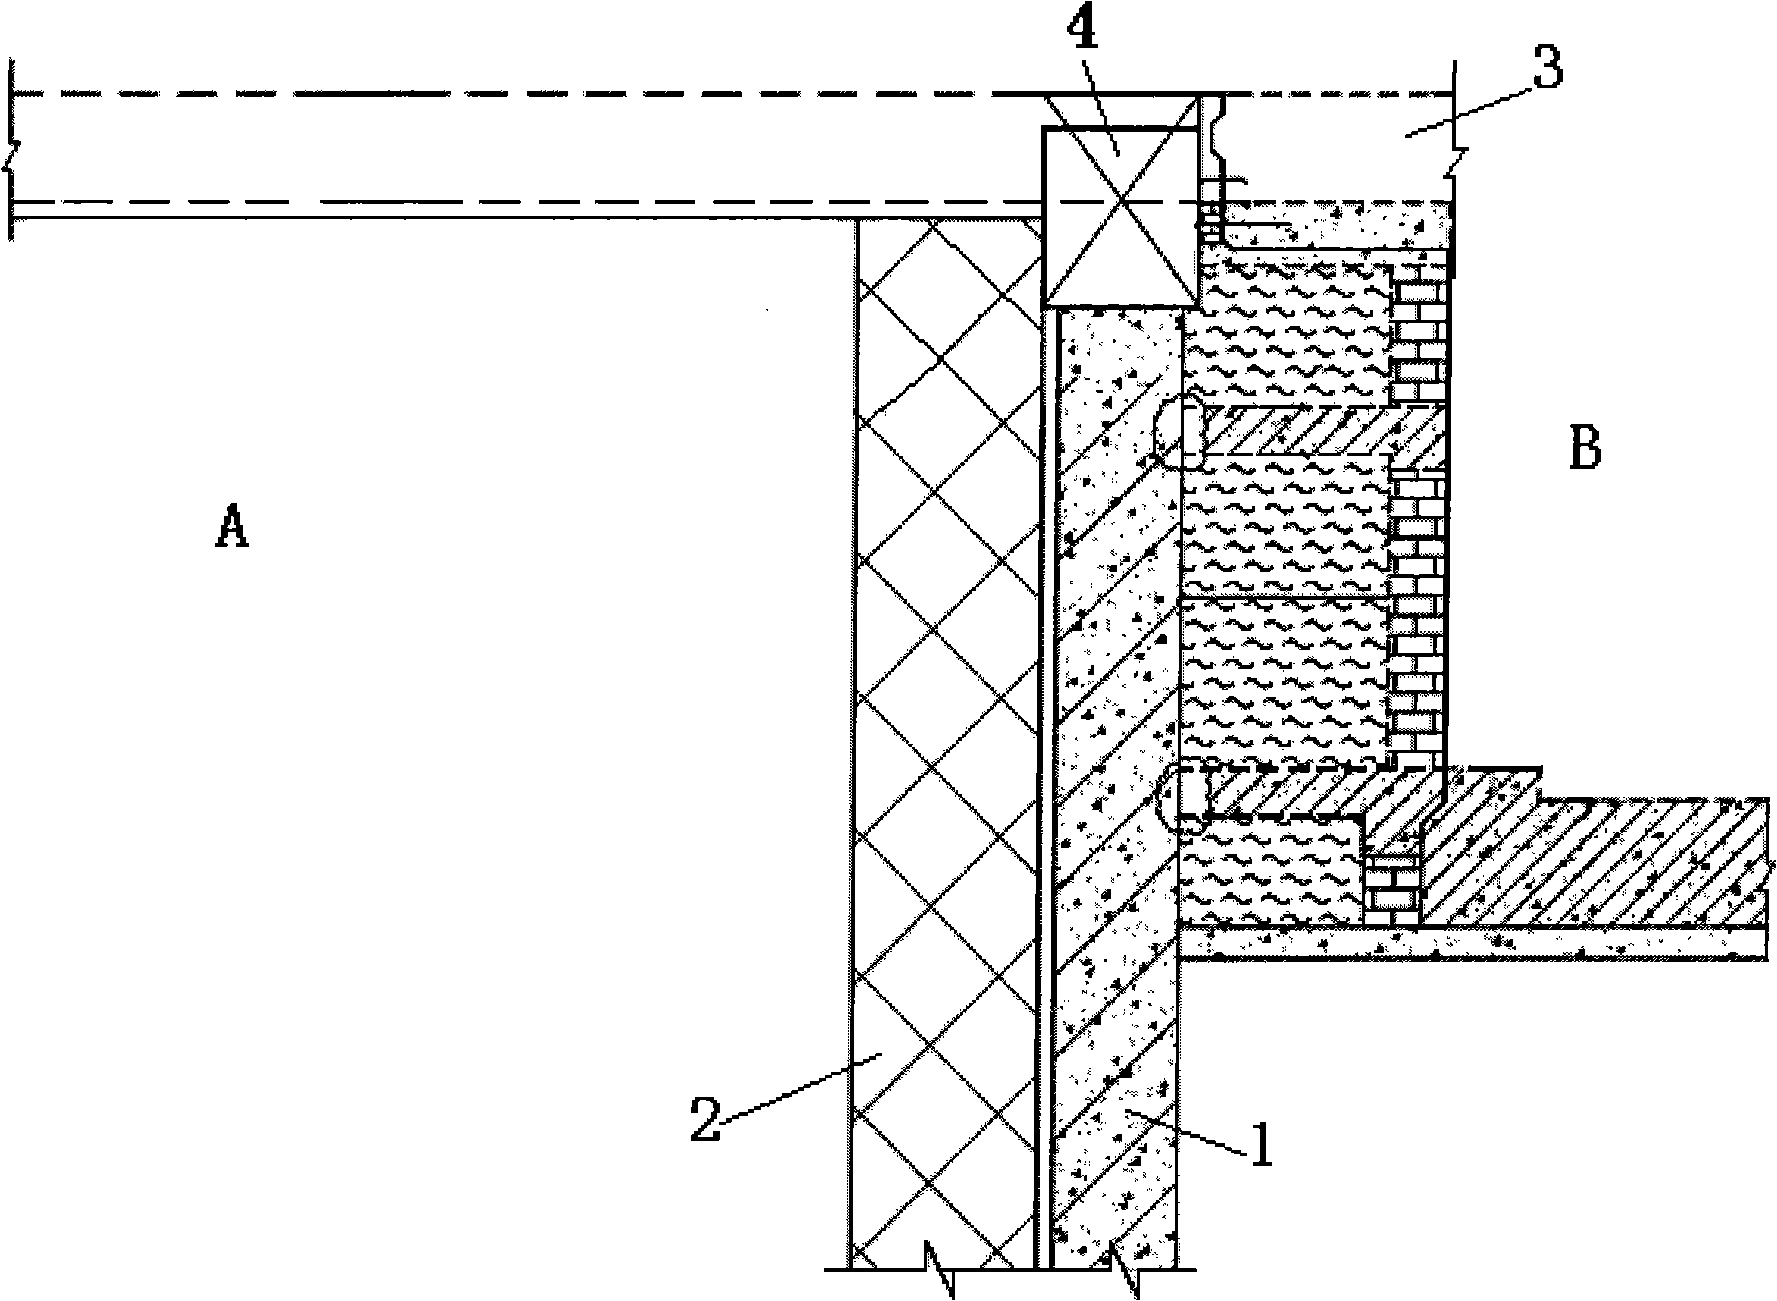 Foundation pit guard method for expansion construction from deep foundation pit to shallow foundation pit